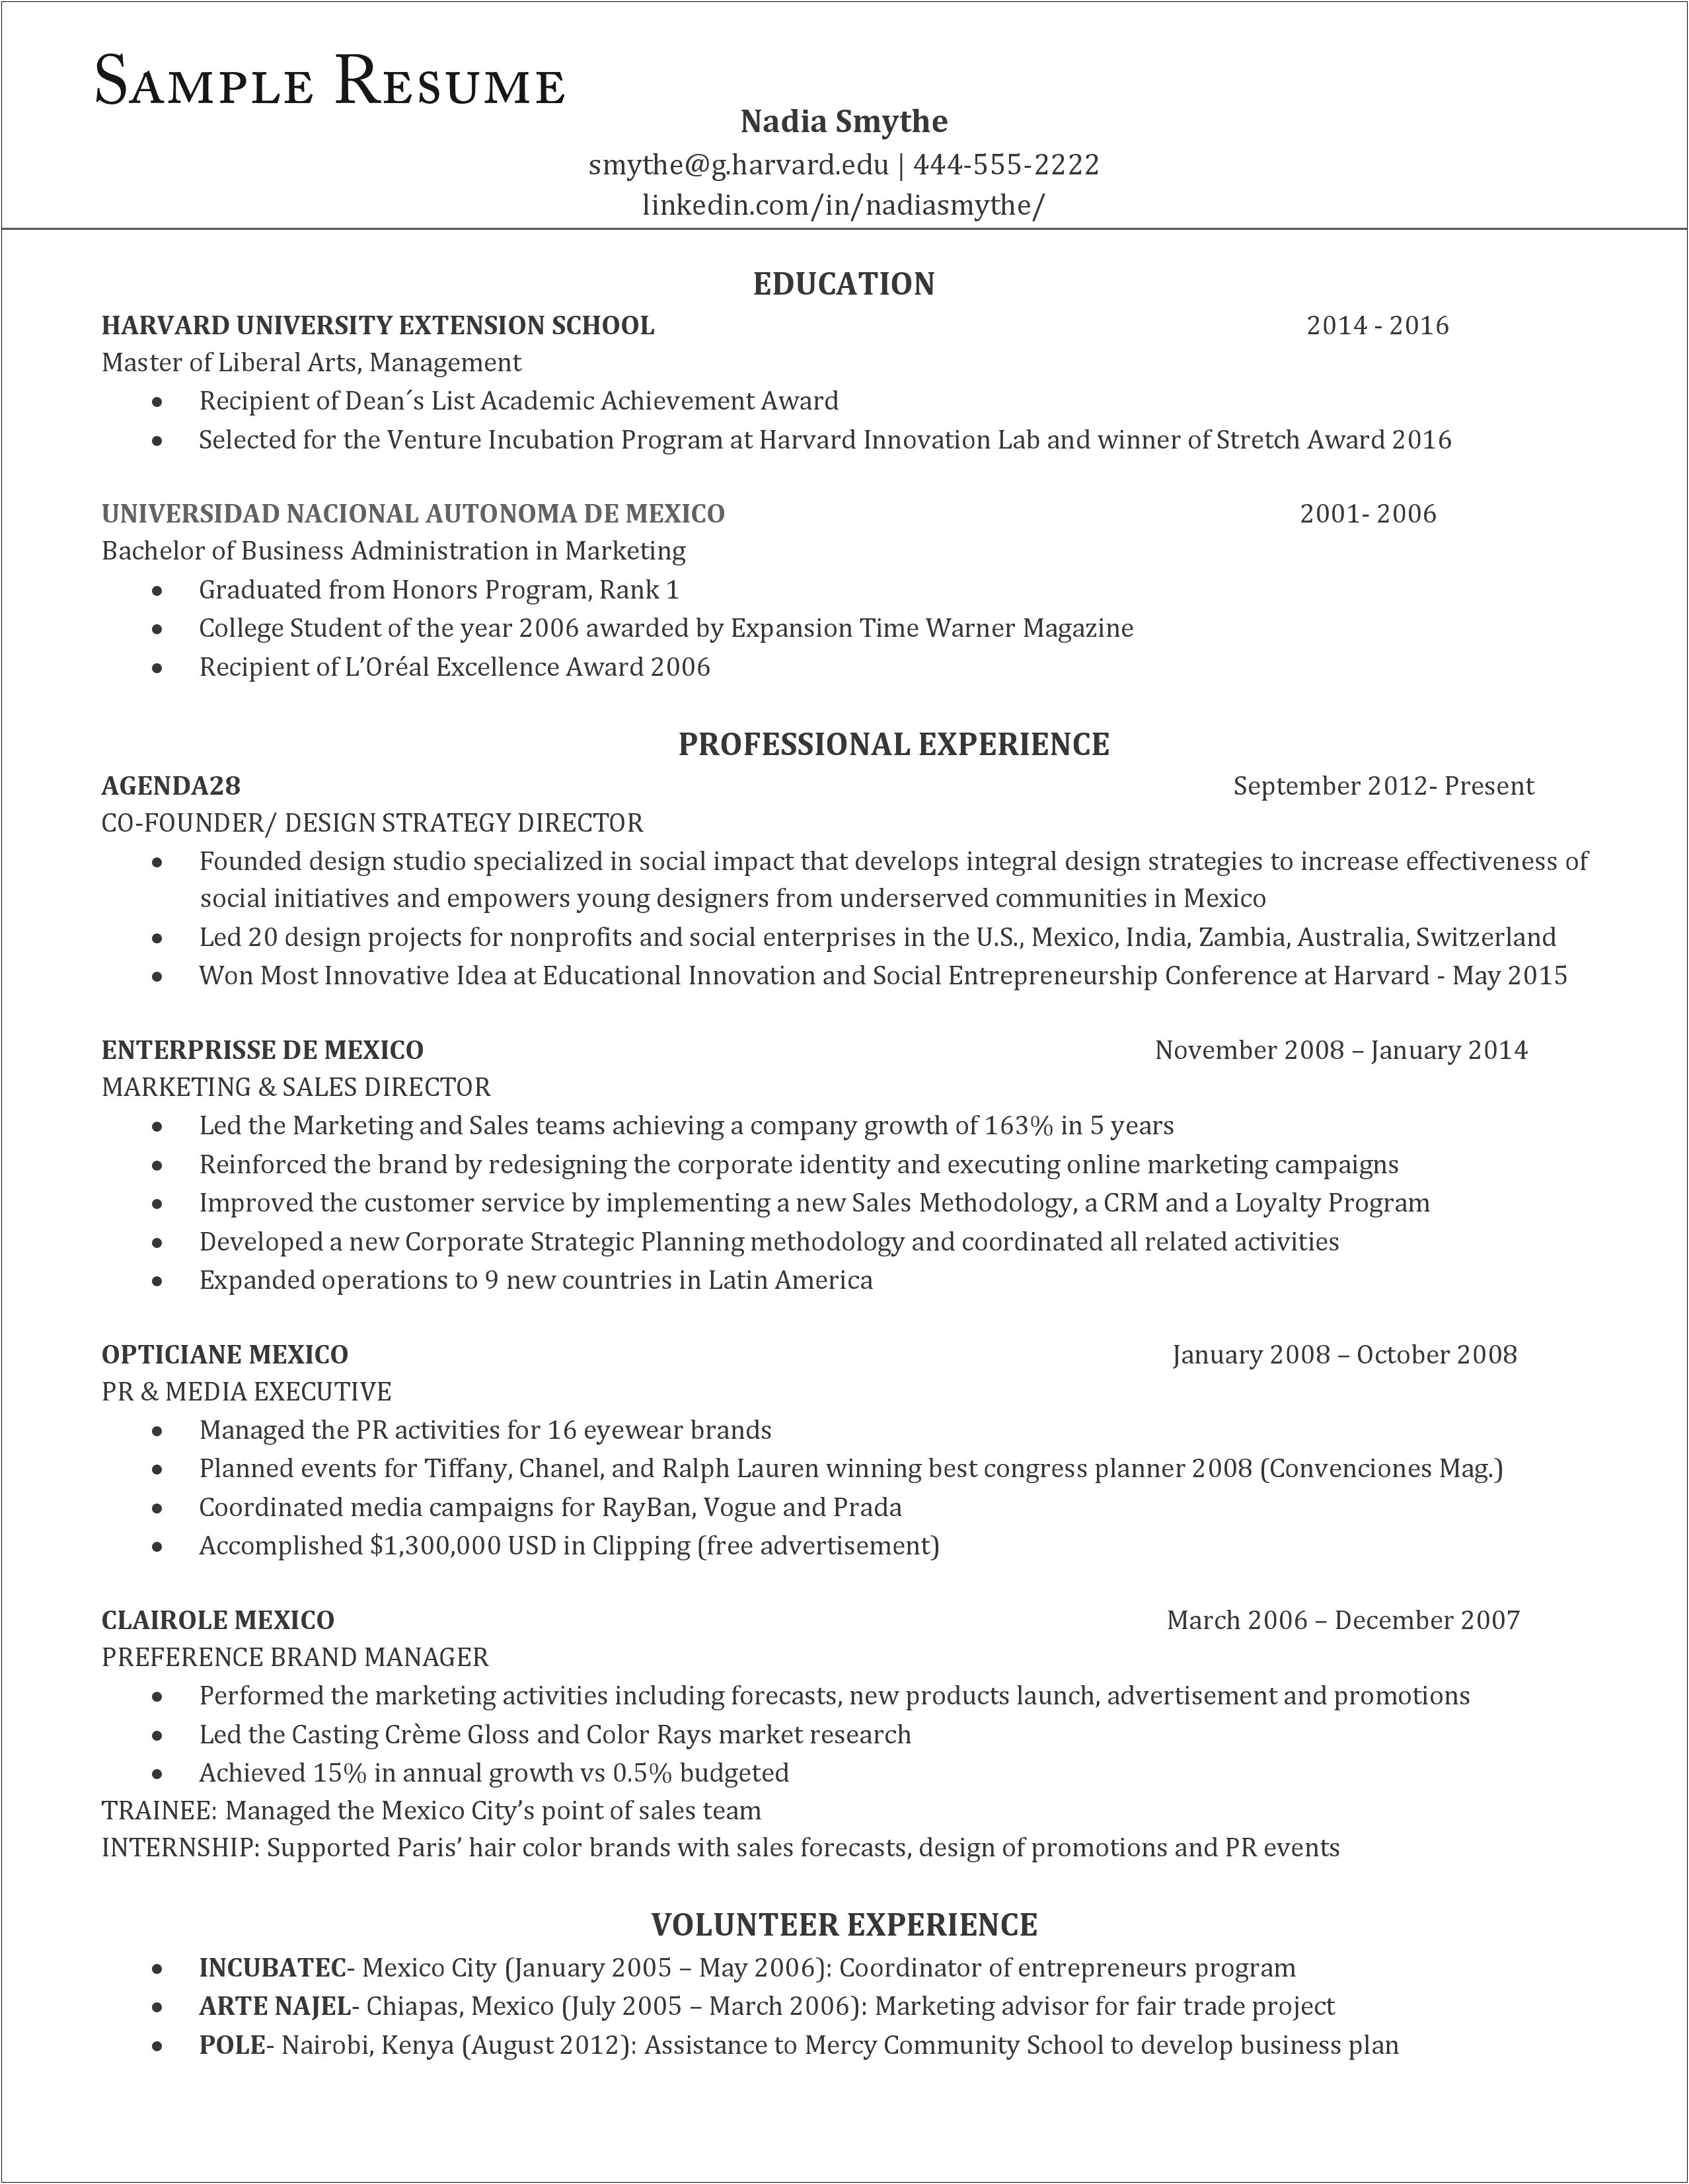 Is Looking Perfect Word For Resume